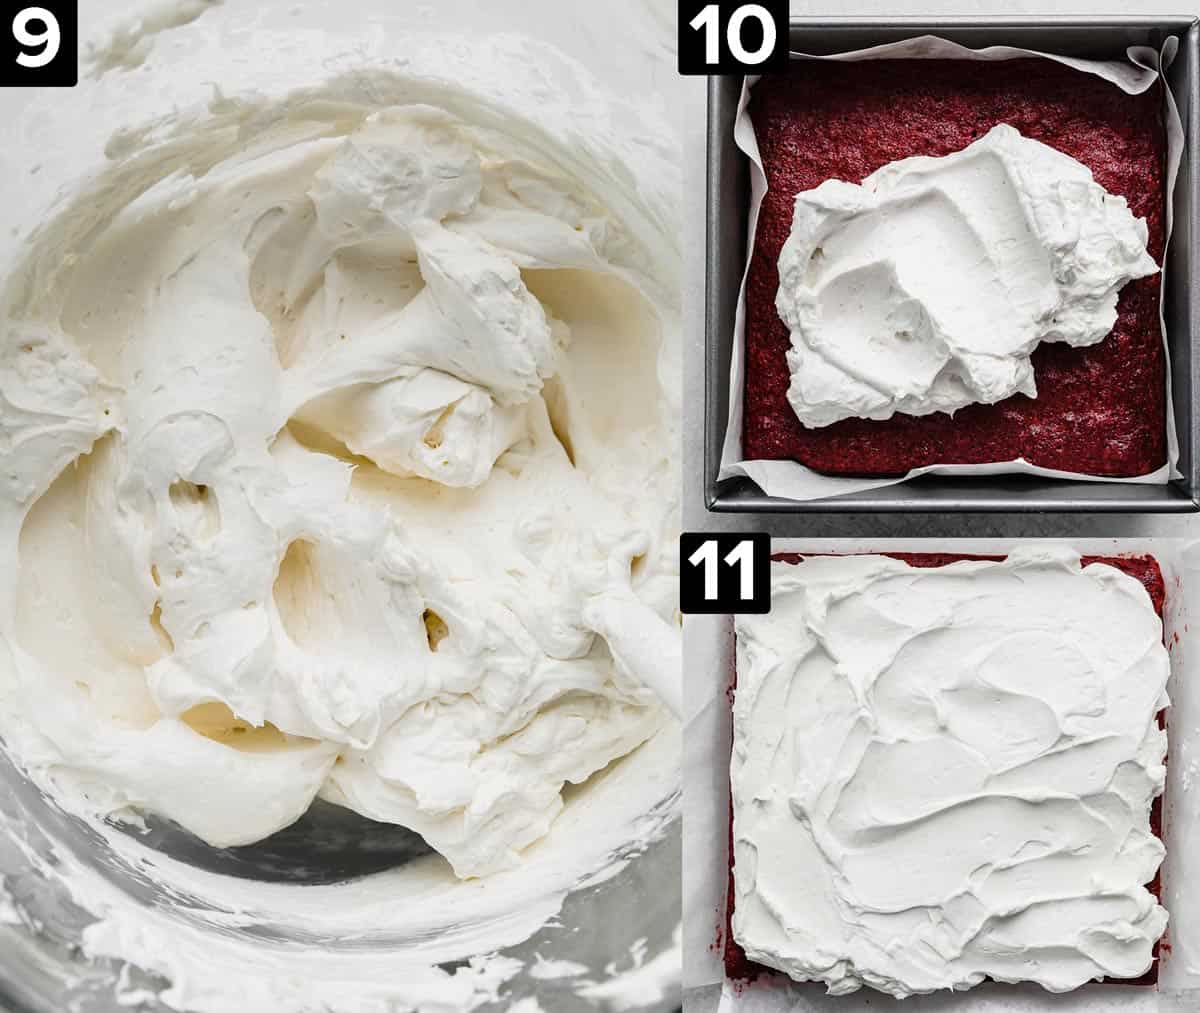 Three images, left image shows cream cheese whipped cream frosting in a bowl, right two images show Red Velvet Brownies topped with whipped cream cream cheese frosting over the brownies.